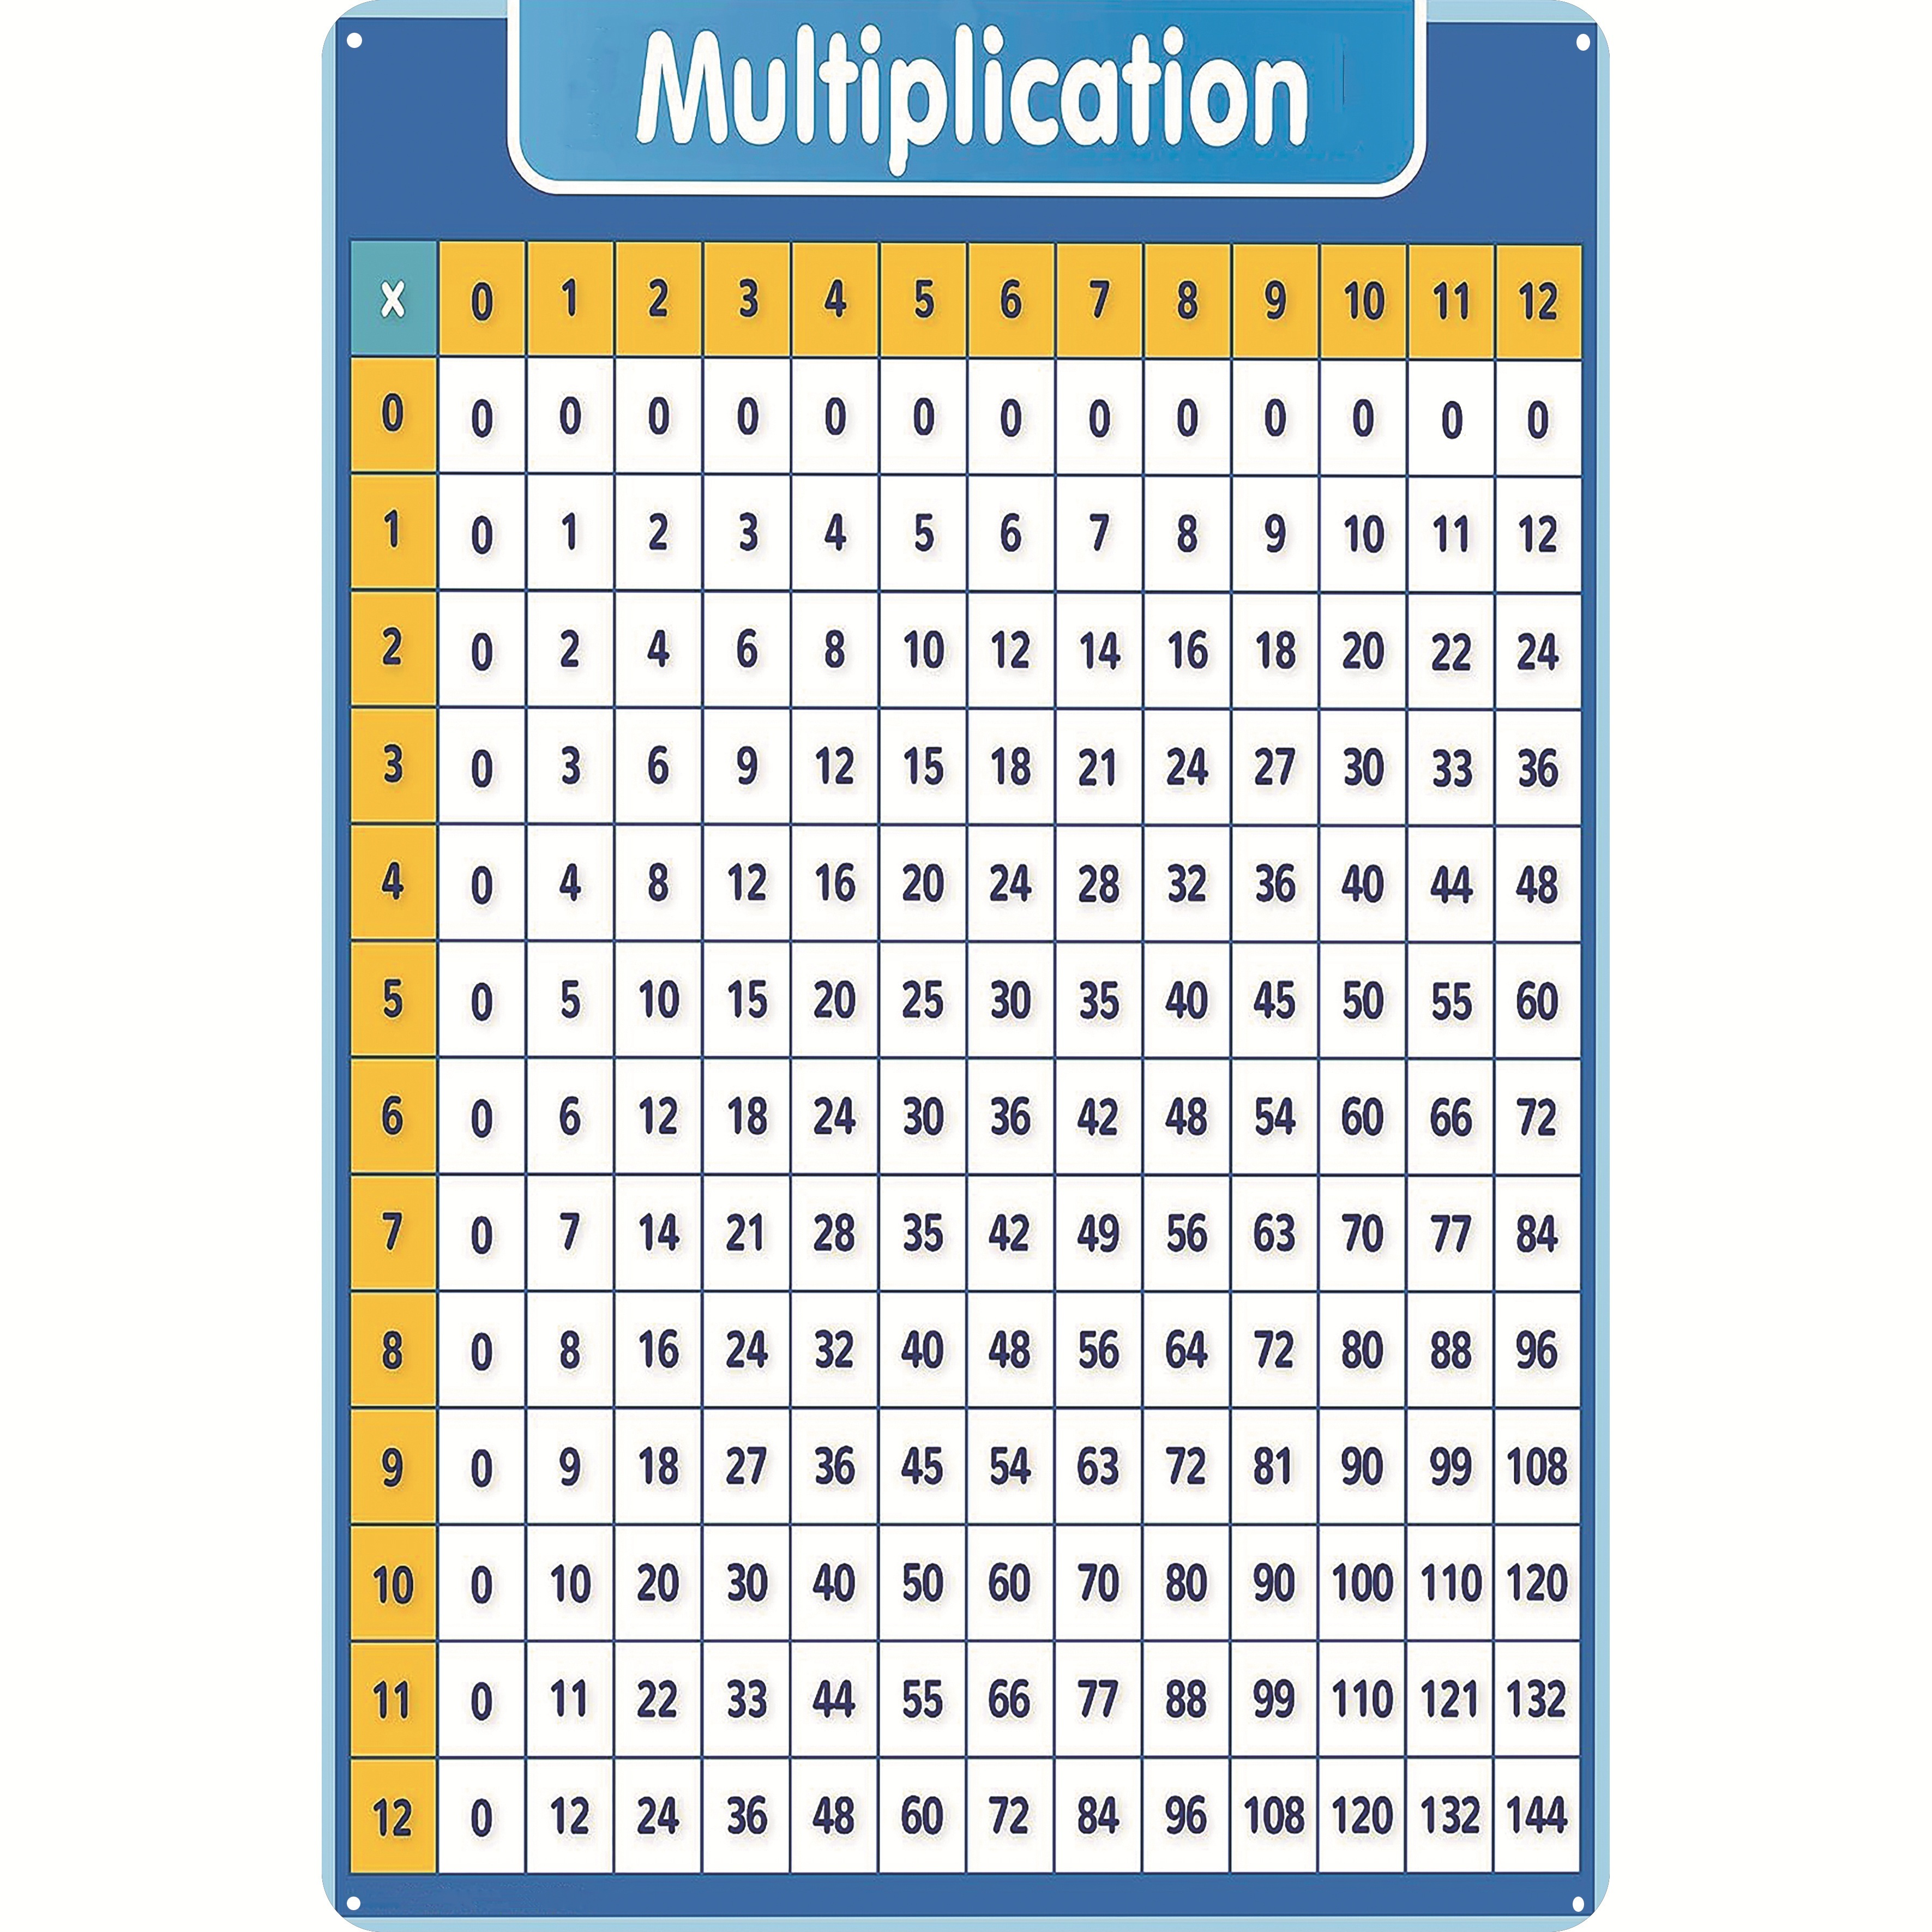 Multiplication Table of 303